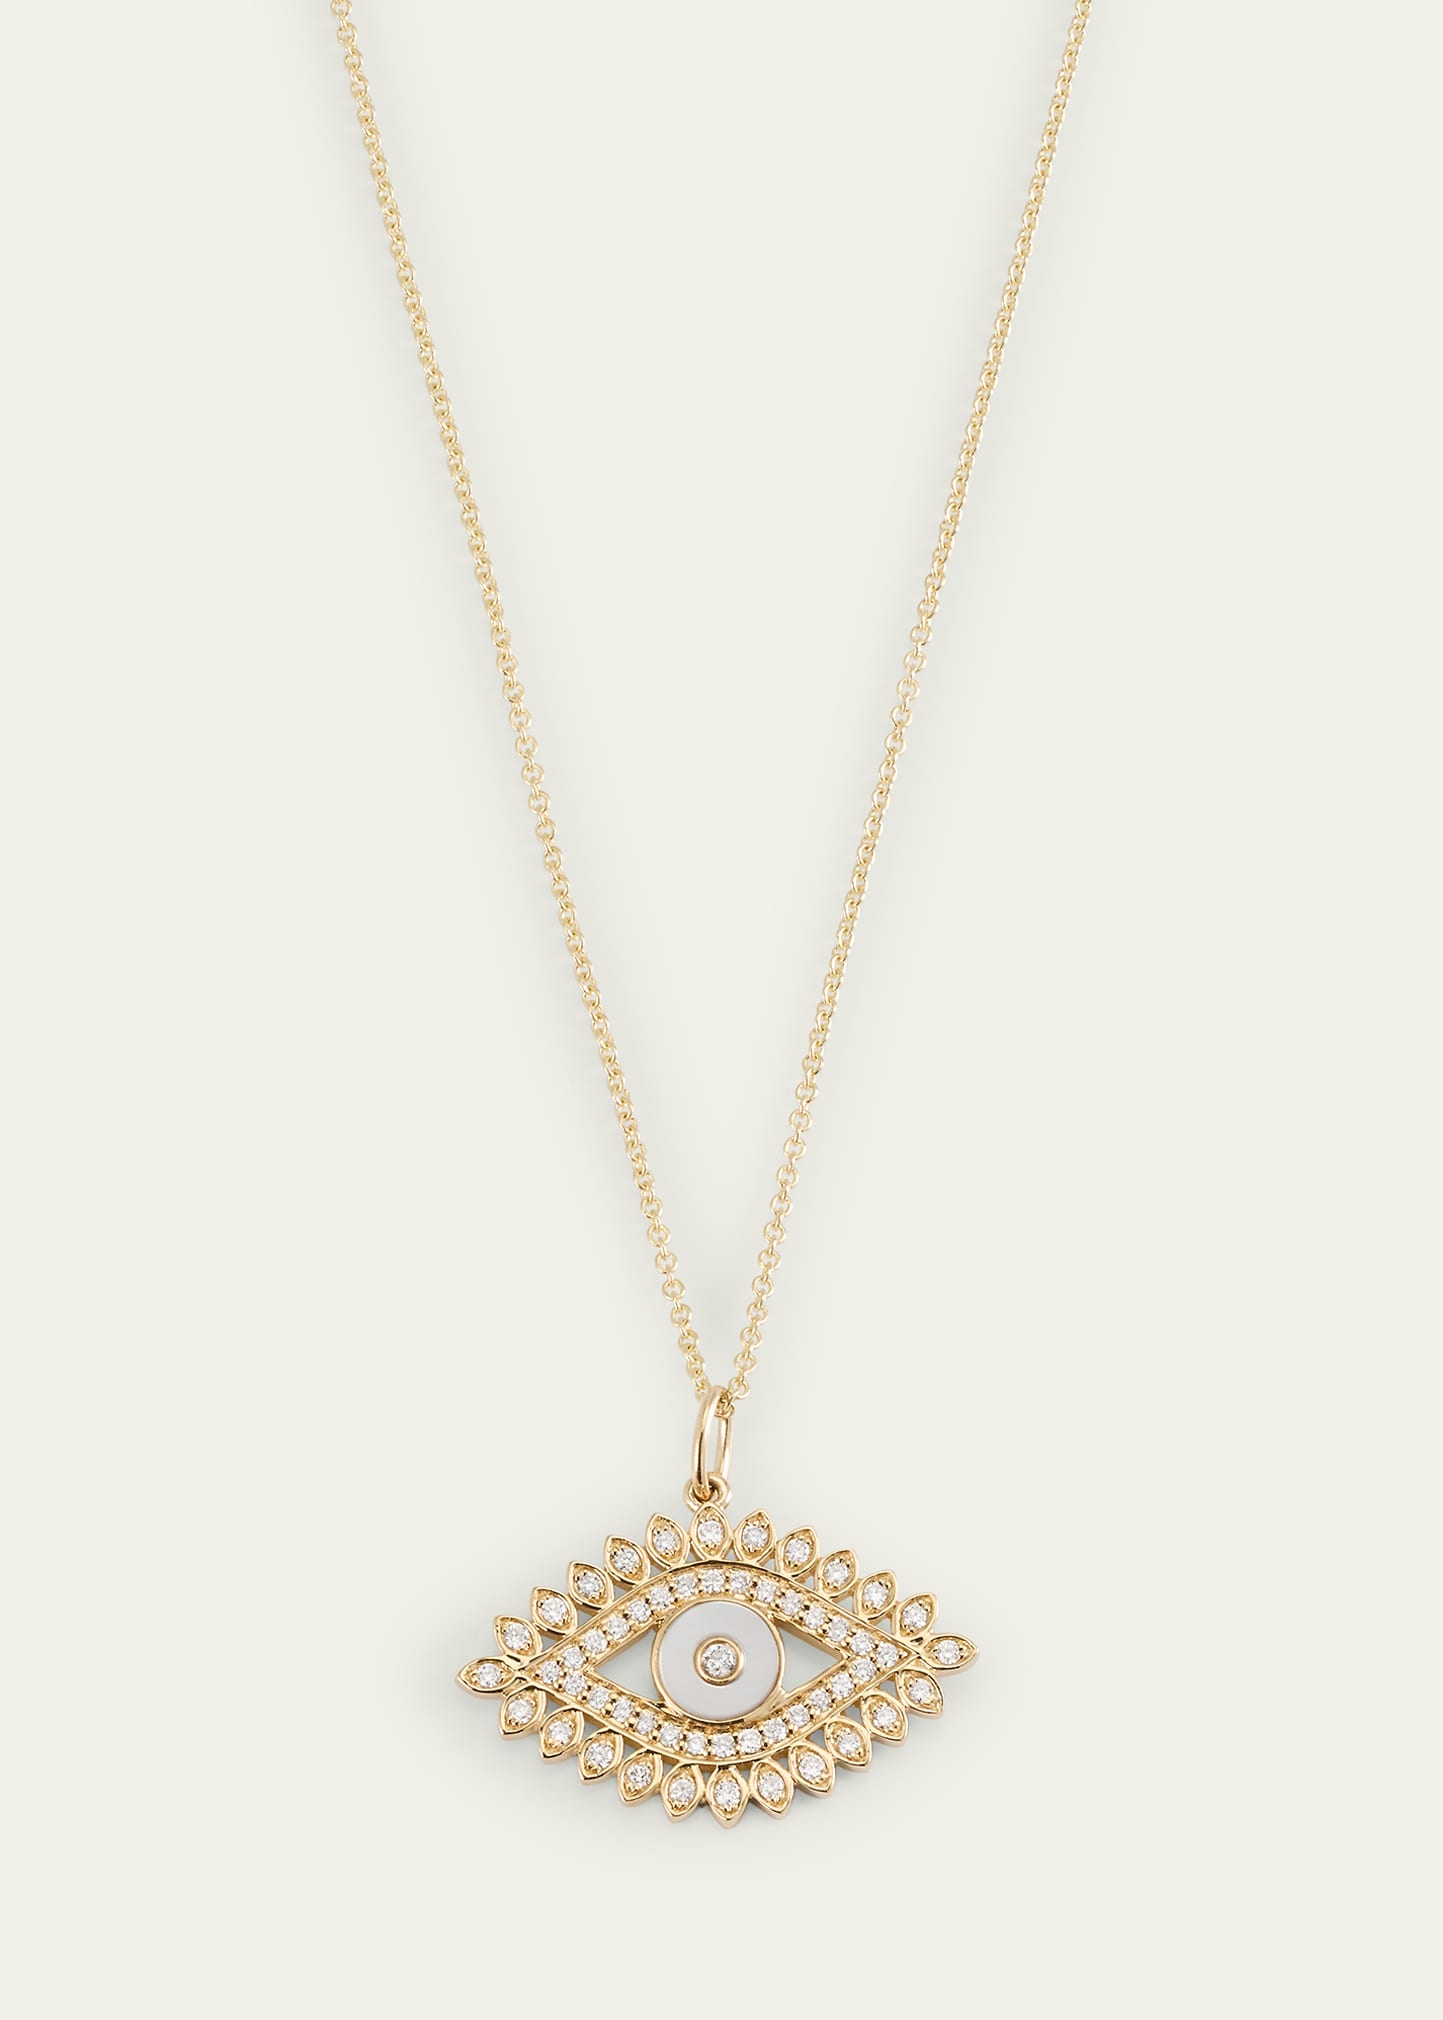 Sydney Evan 14k Yellow Gold Evil Eye Marquise Border With Stone Inlay Charm Necklace In Yg